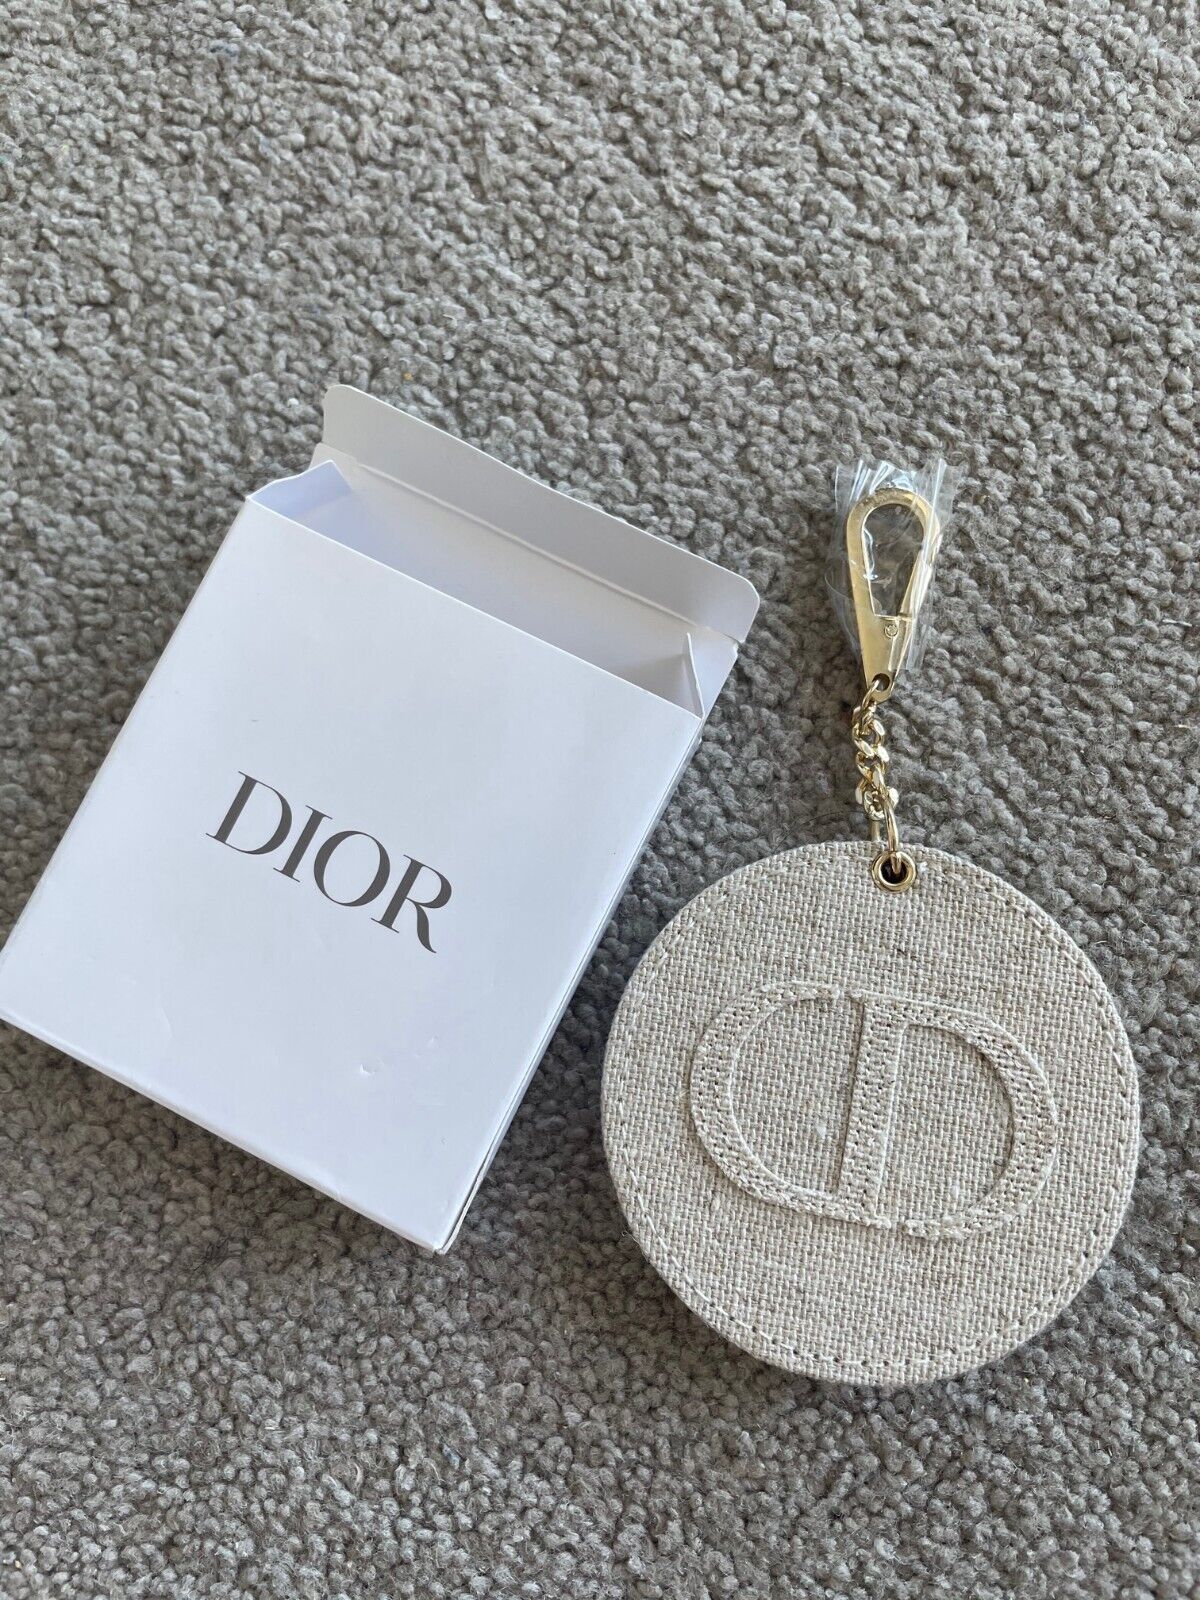 New Authentic Christian Dior Beaute Beauty Compact Mirror Charm Keyring Key Ring